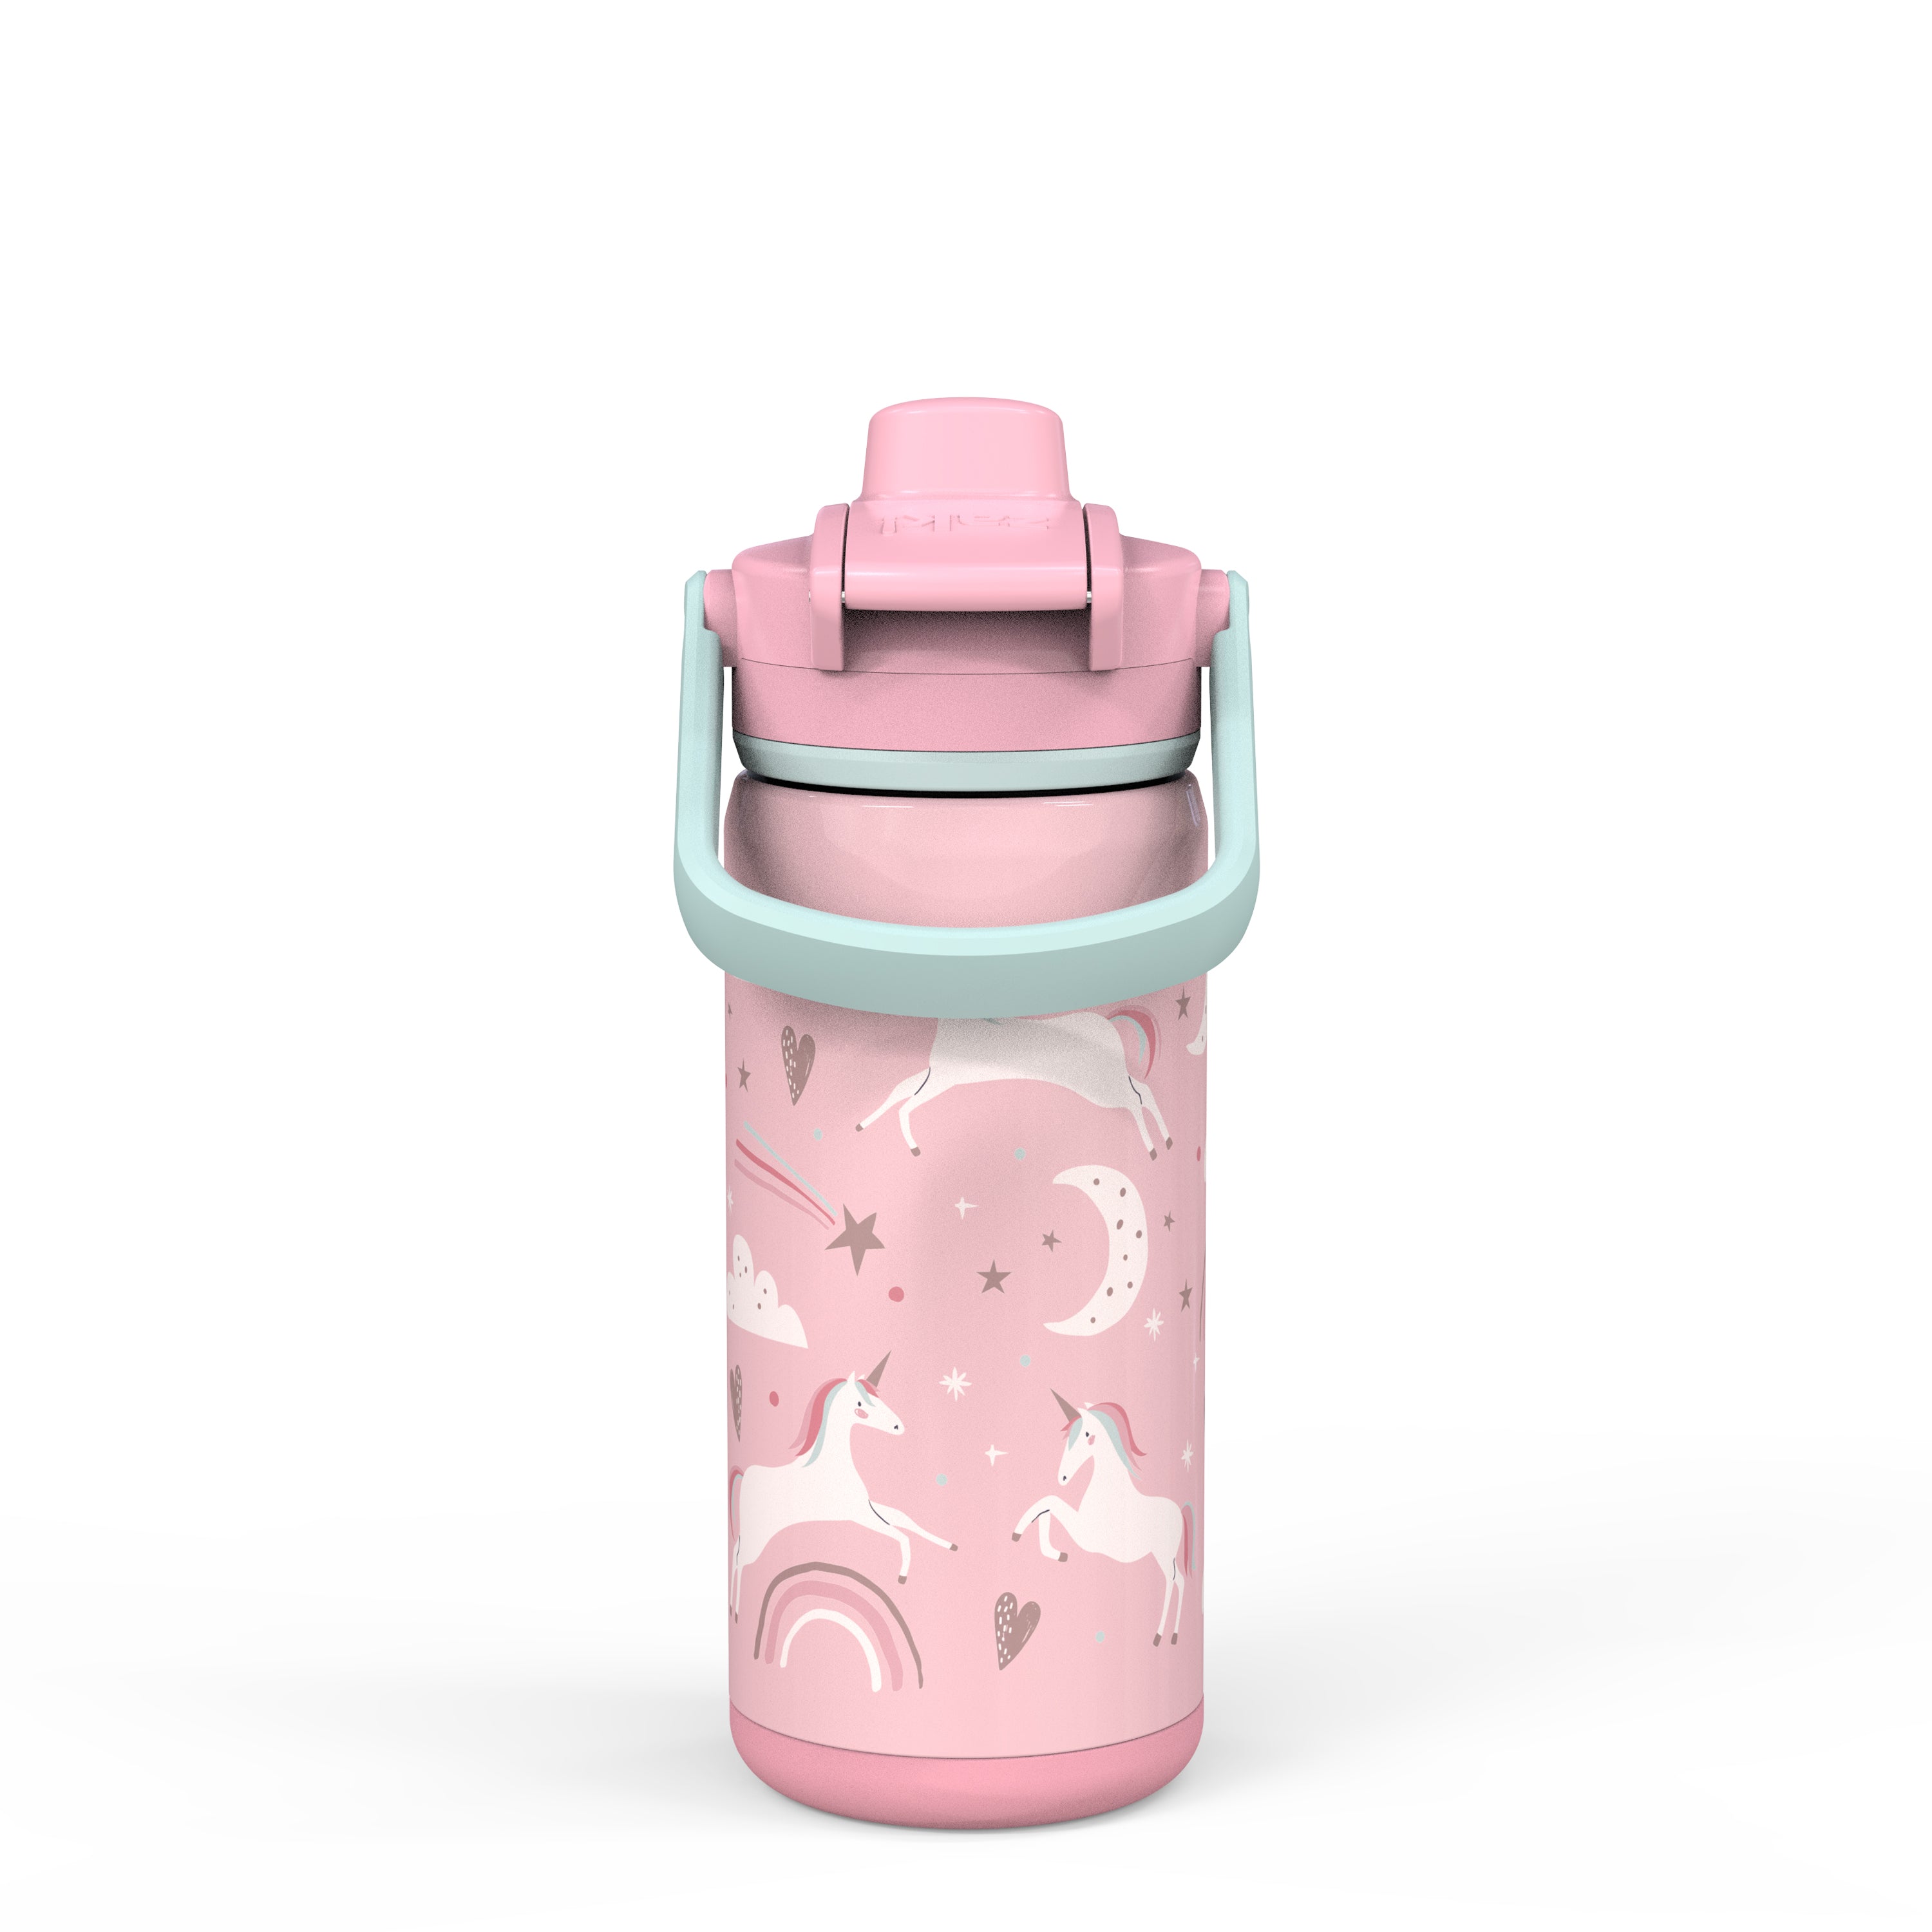 Pink Unicorn Stainless Steel Water Bottle - 20 oz Insulated